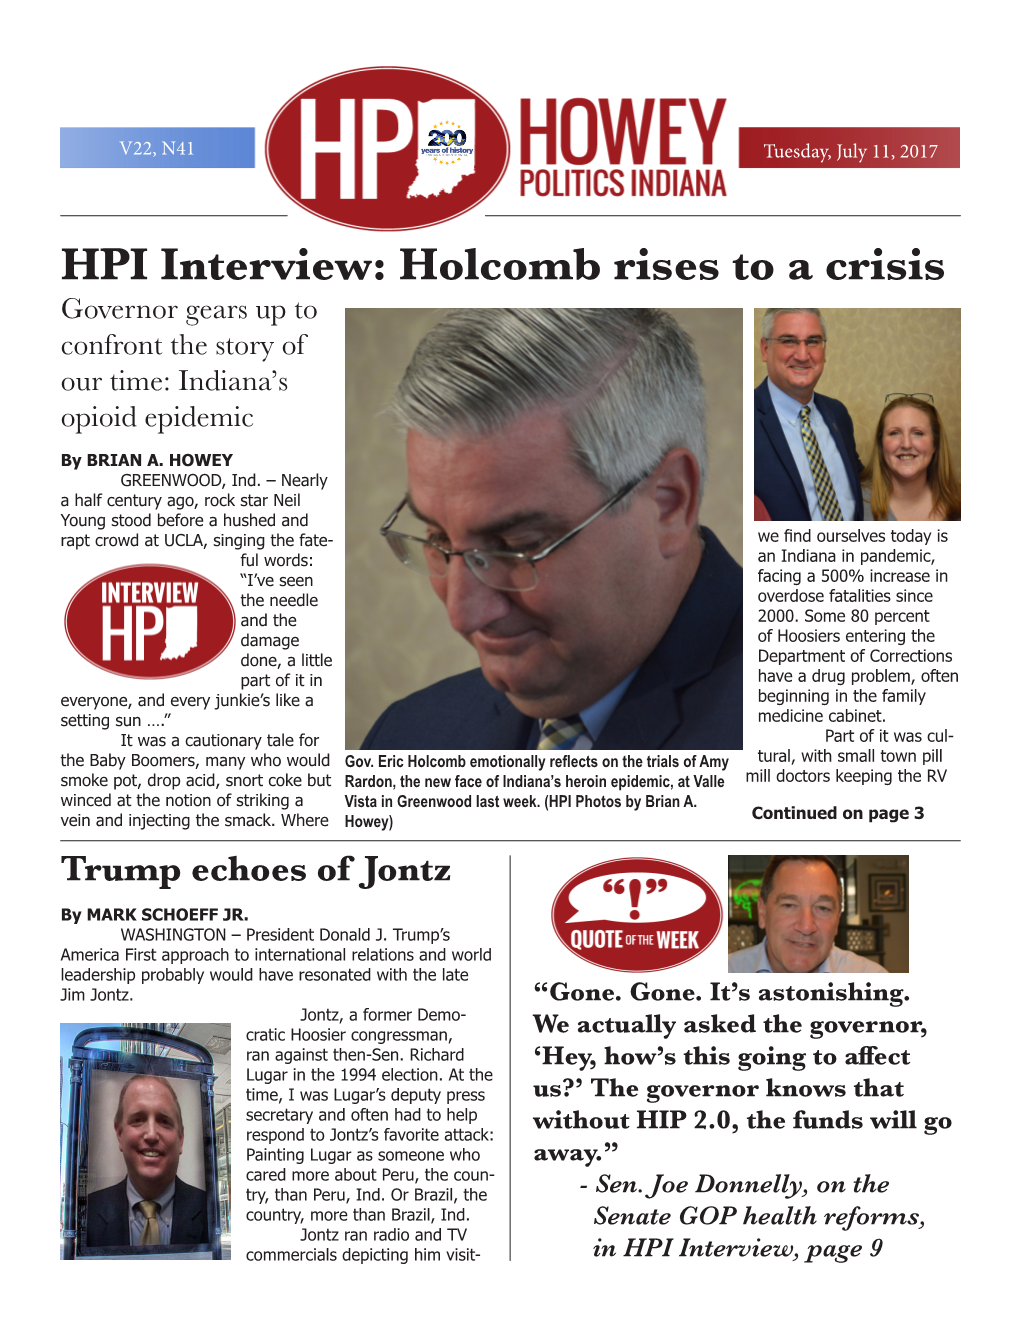 HPI Interview: Holcomb Rises to a Crisis Governor Gears up to Confront the Story of Our Time: Indiana’S Opioid Epidemic by BRIAN A